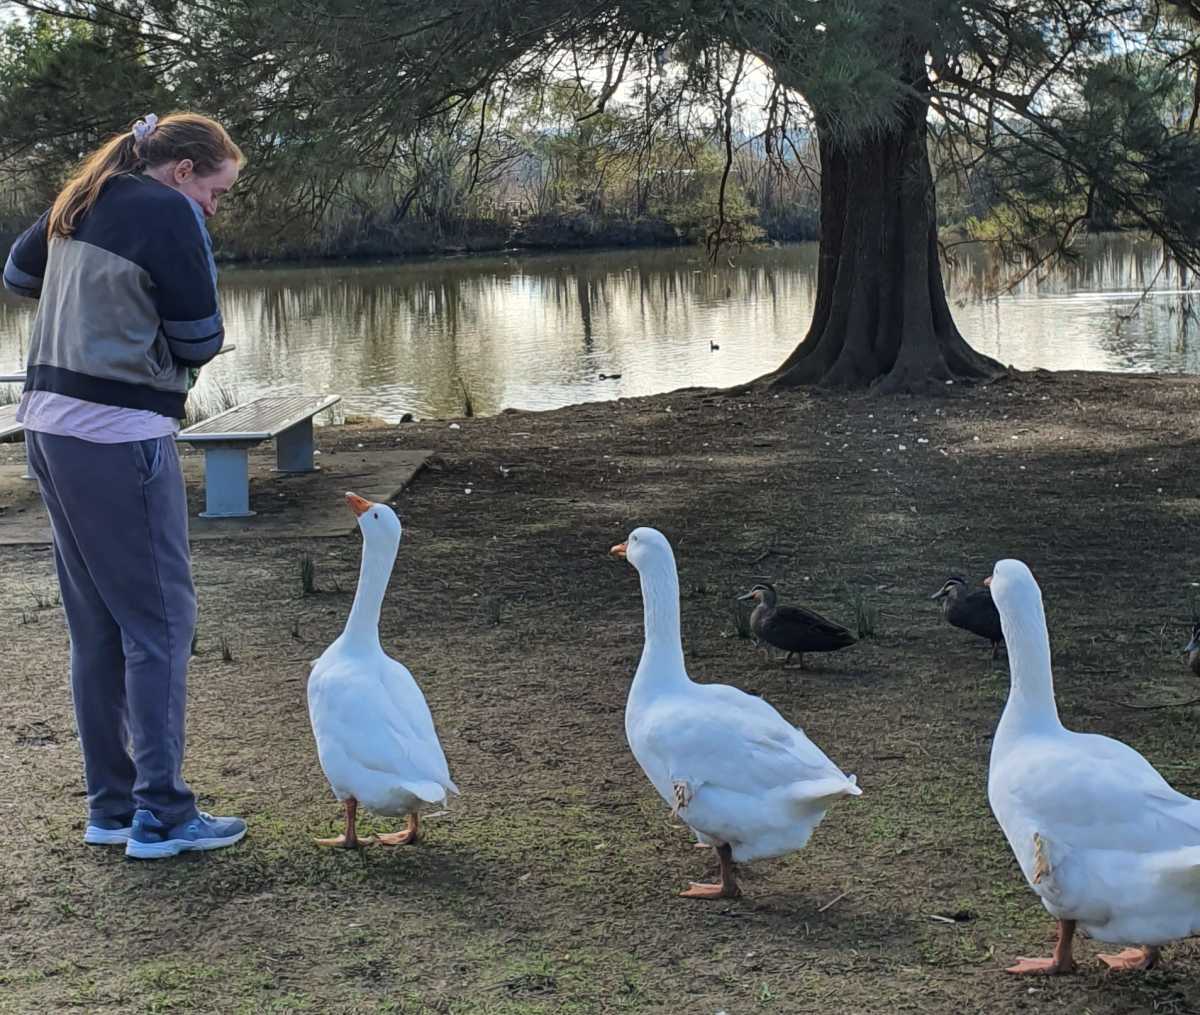 Cassie standing near a lake with three geese.